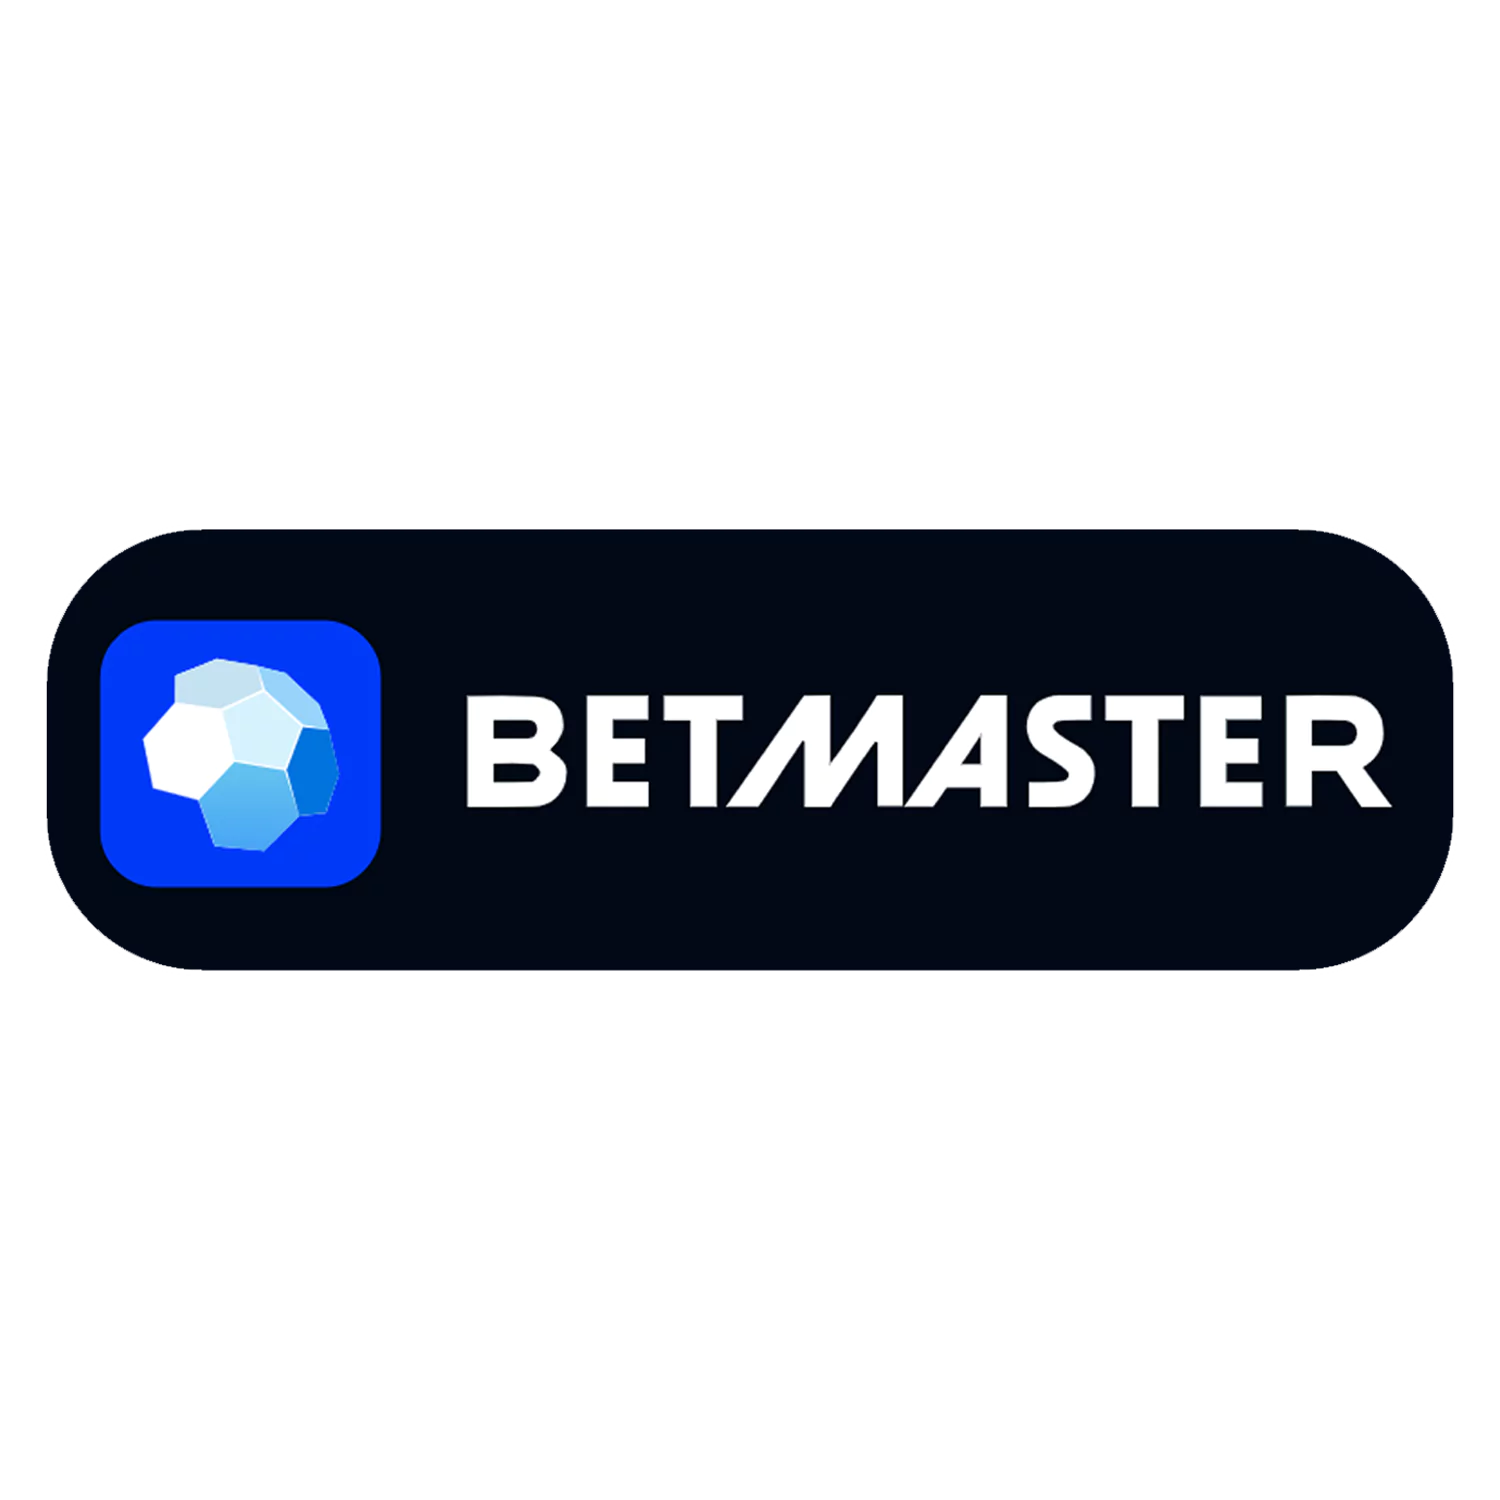 New users from India can receive big bonuses and spend them on sports bets at Betmaster.